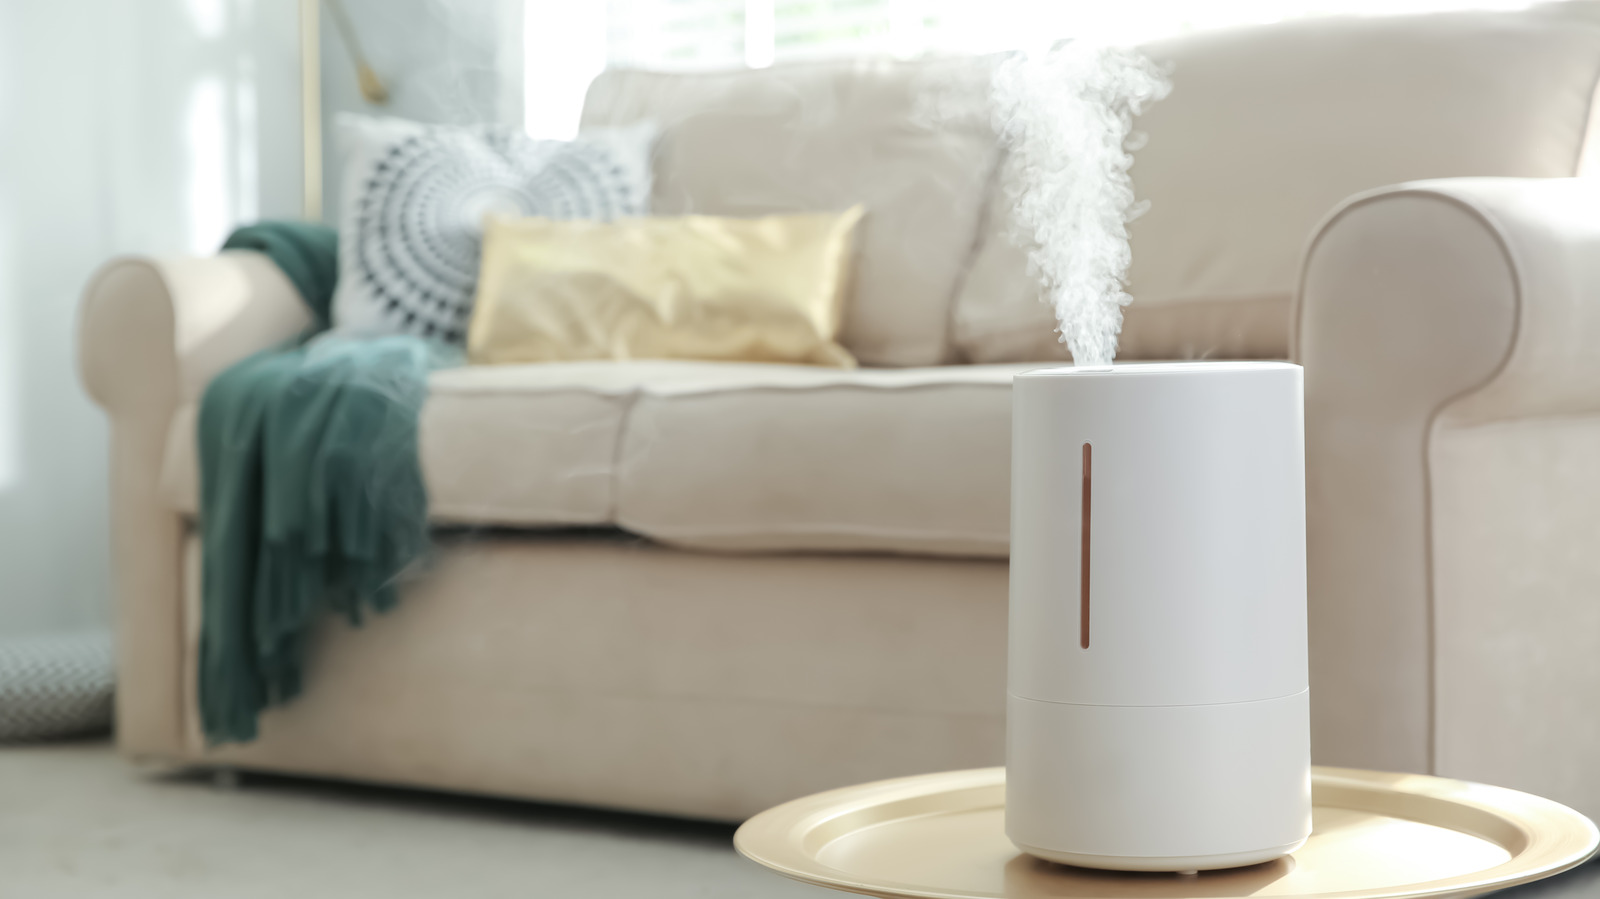 Tips for finding the perfect spot for your humidifier